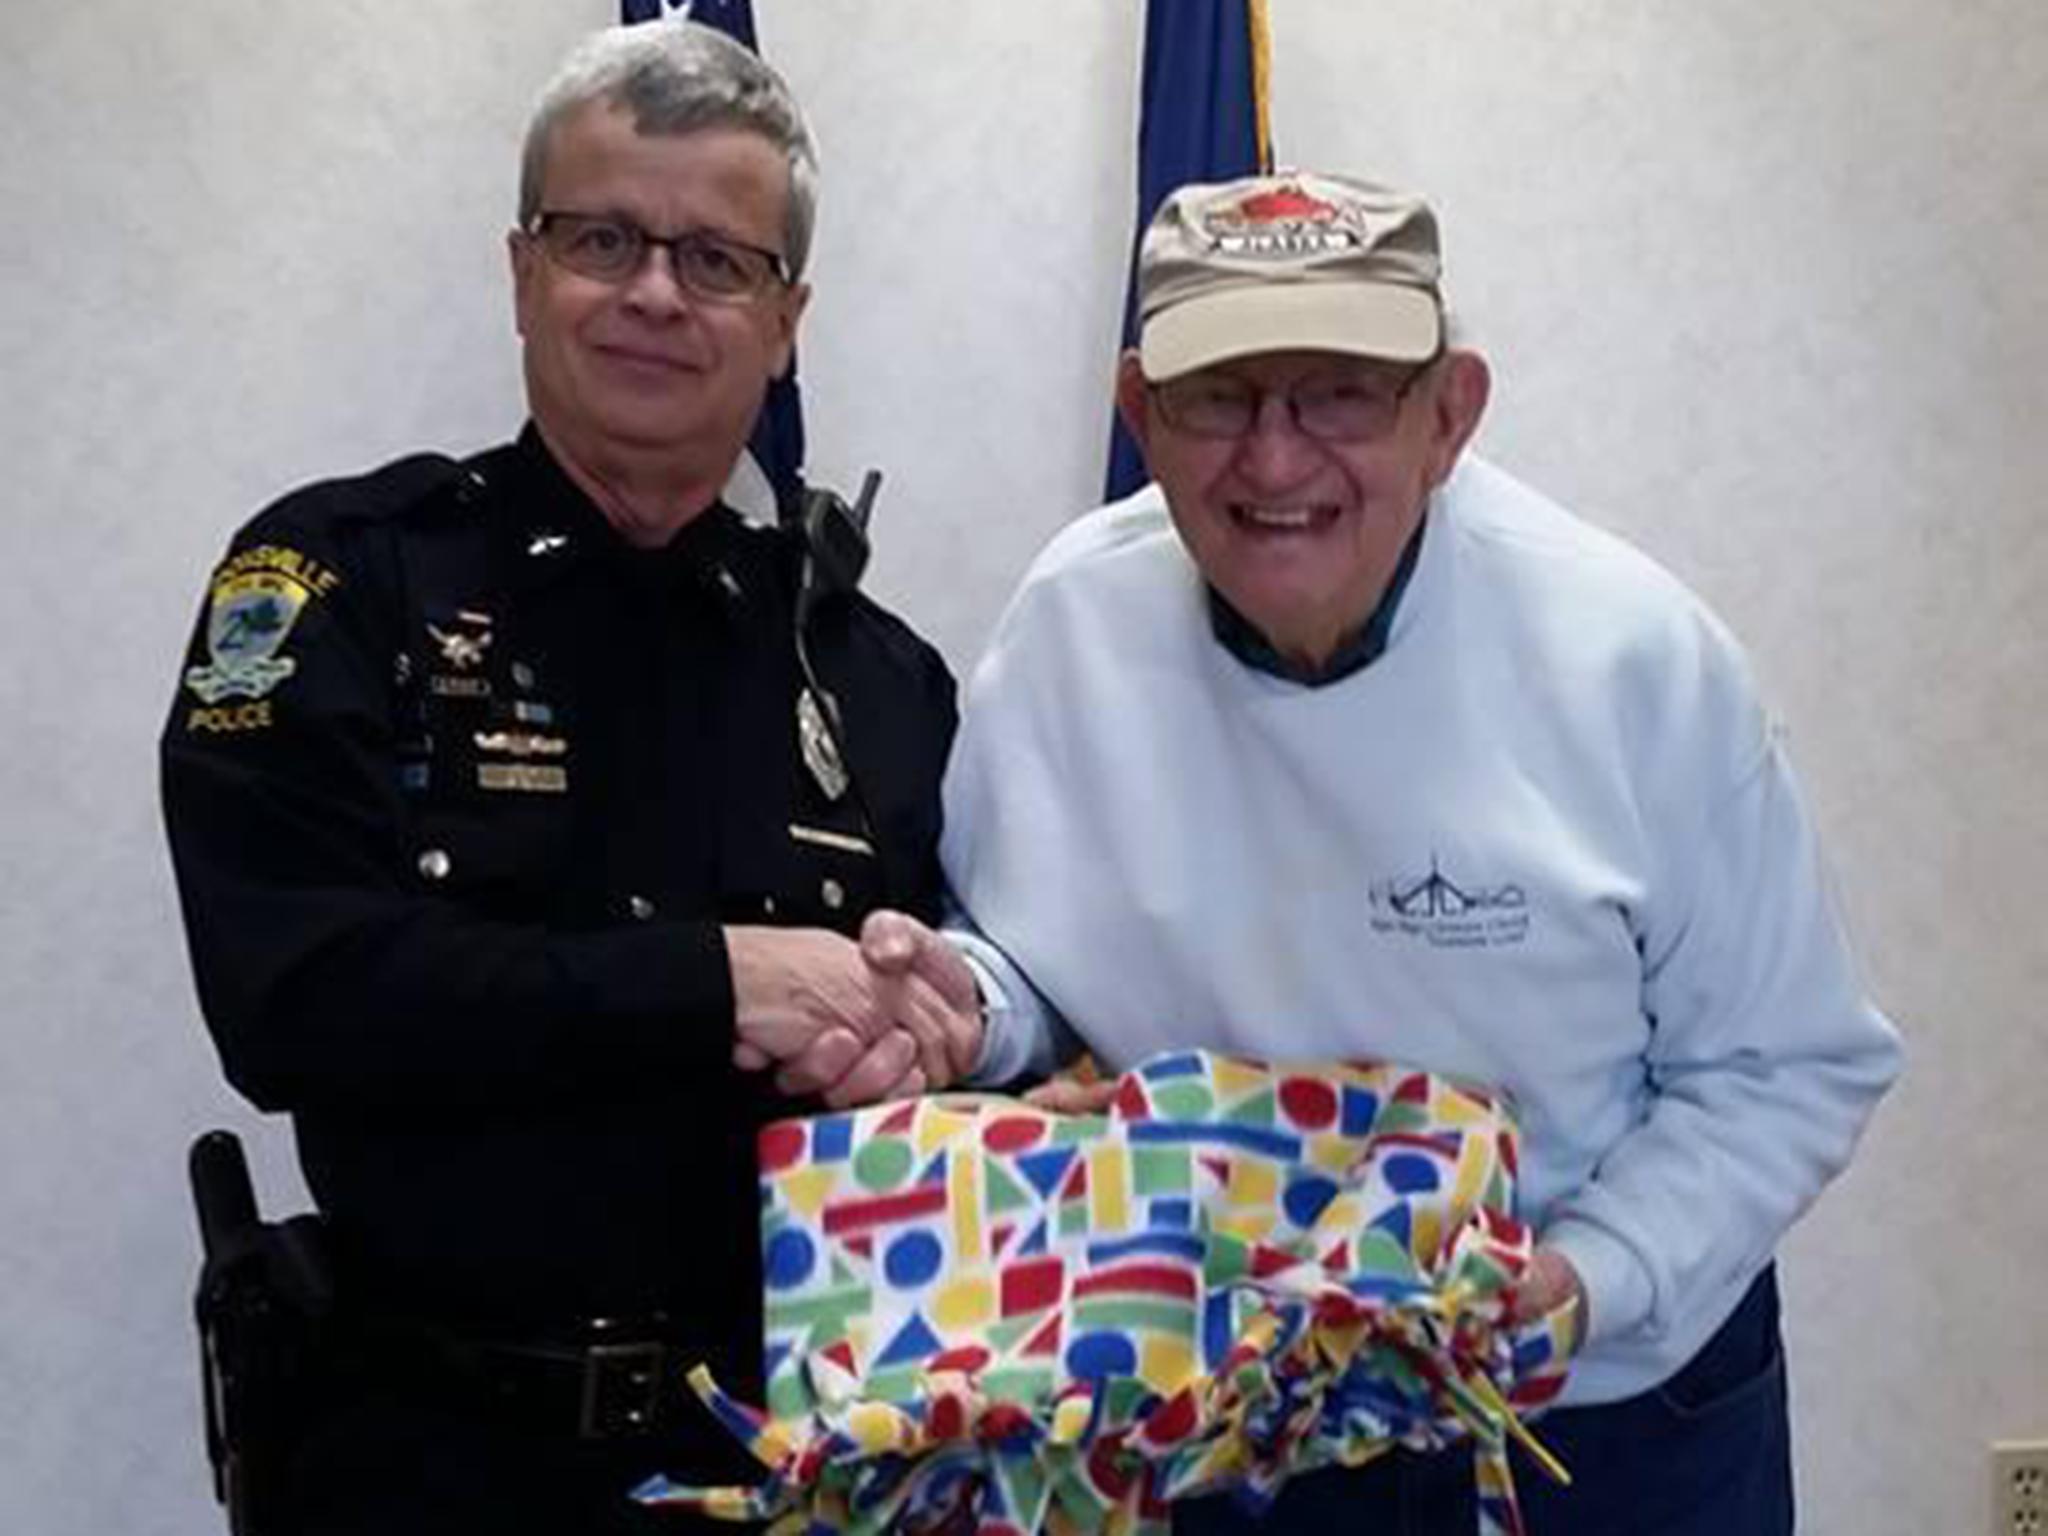 Eighty-eight year-old Clayton Shelburne makes blankets for his local police department.